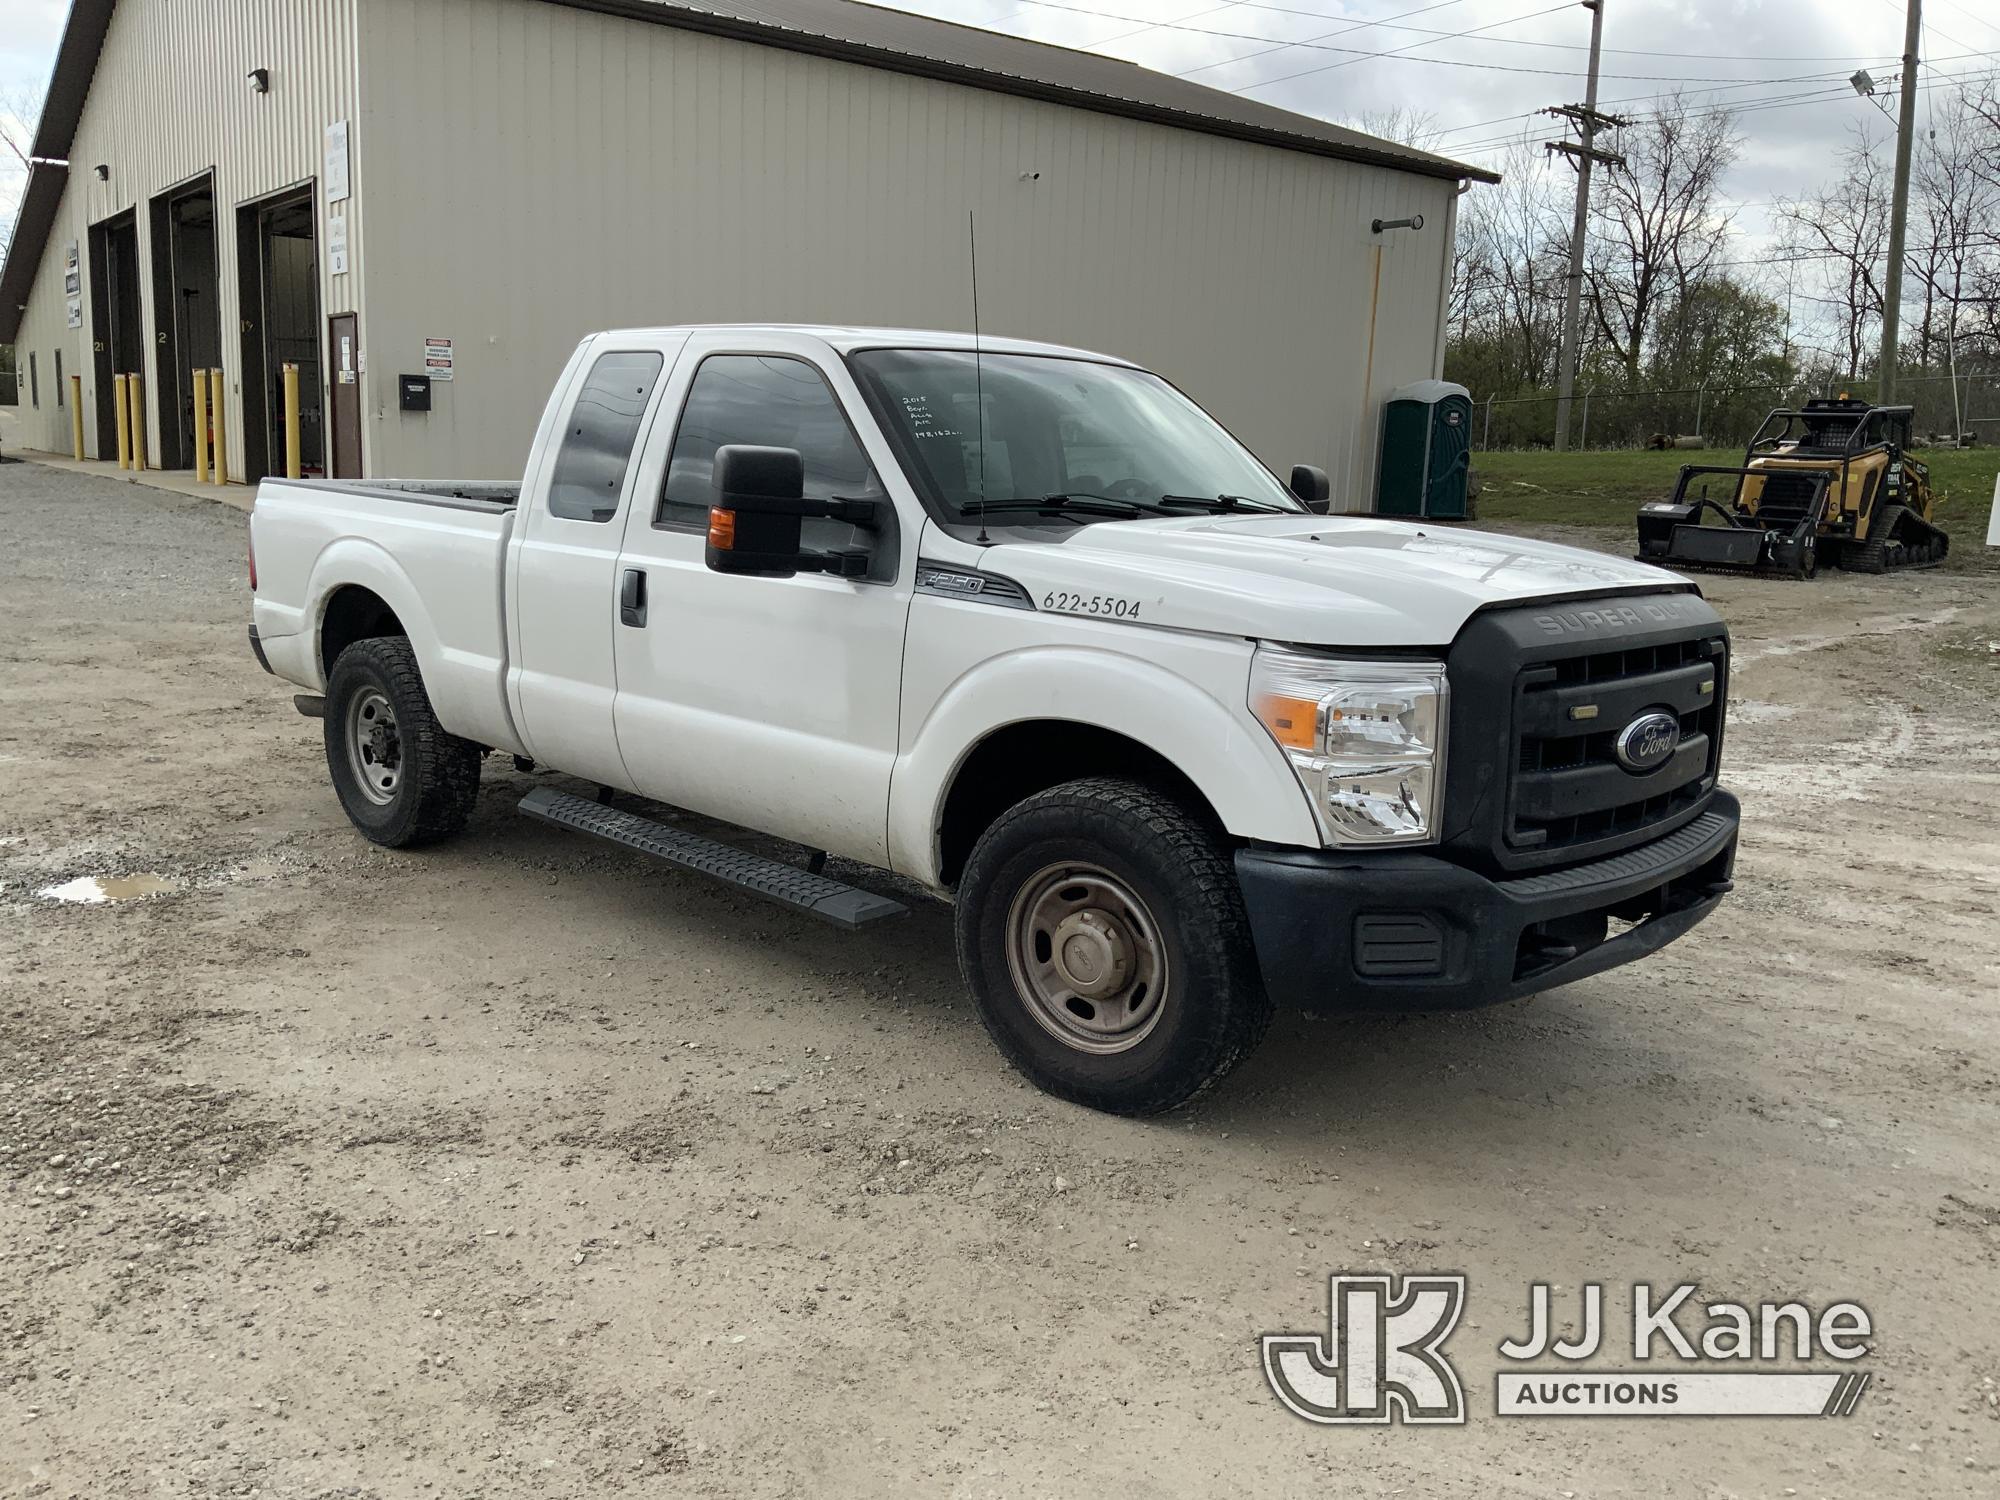 (Fort Wayne, IN) 2015 Ford F250 Extended-Cab Pickup Truck Not Running, Condition Unknown, No Crank